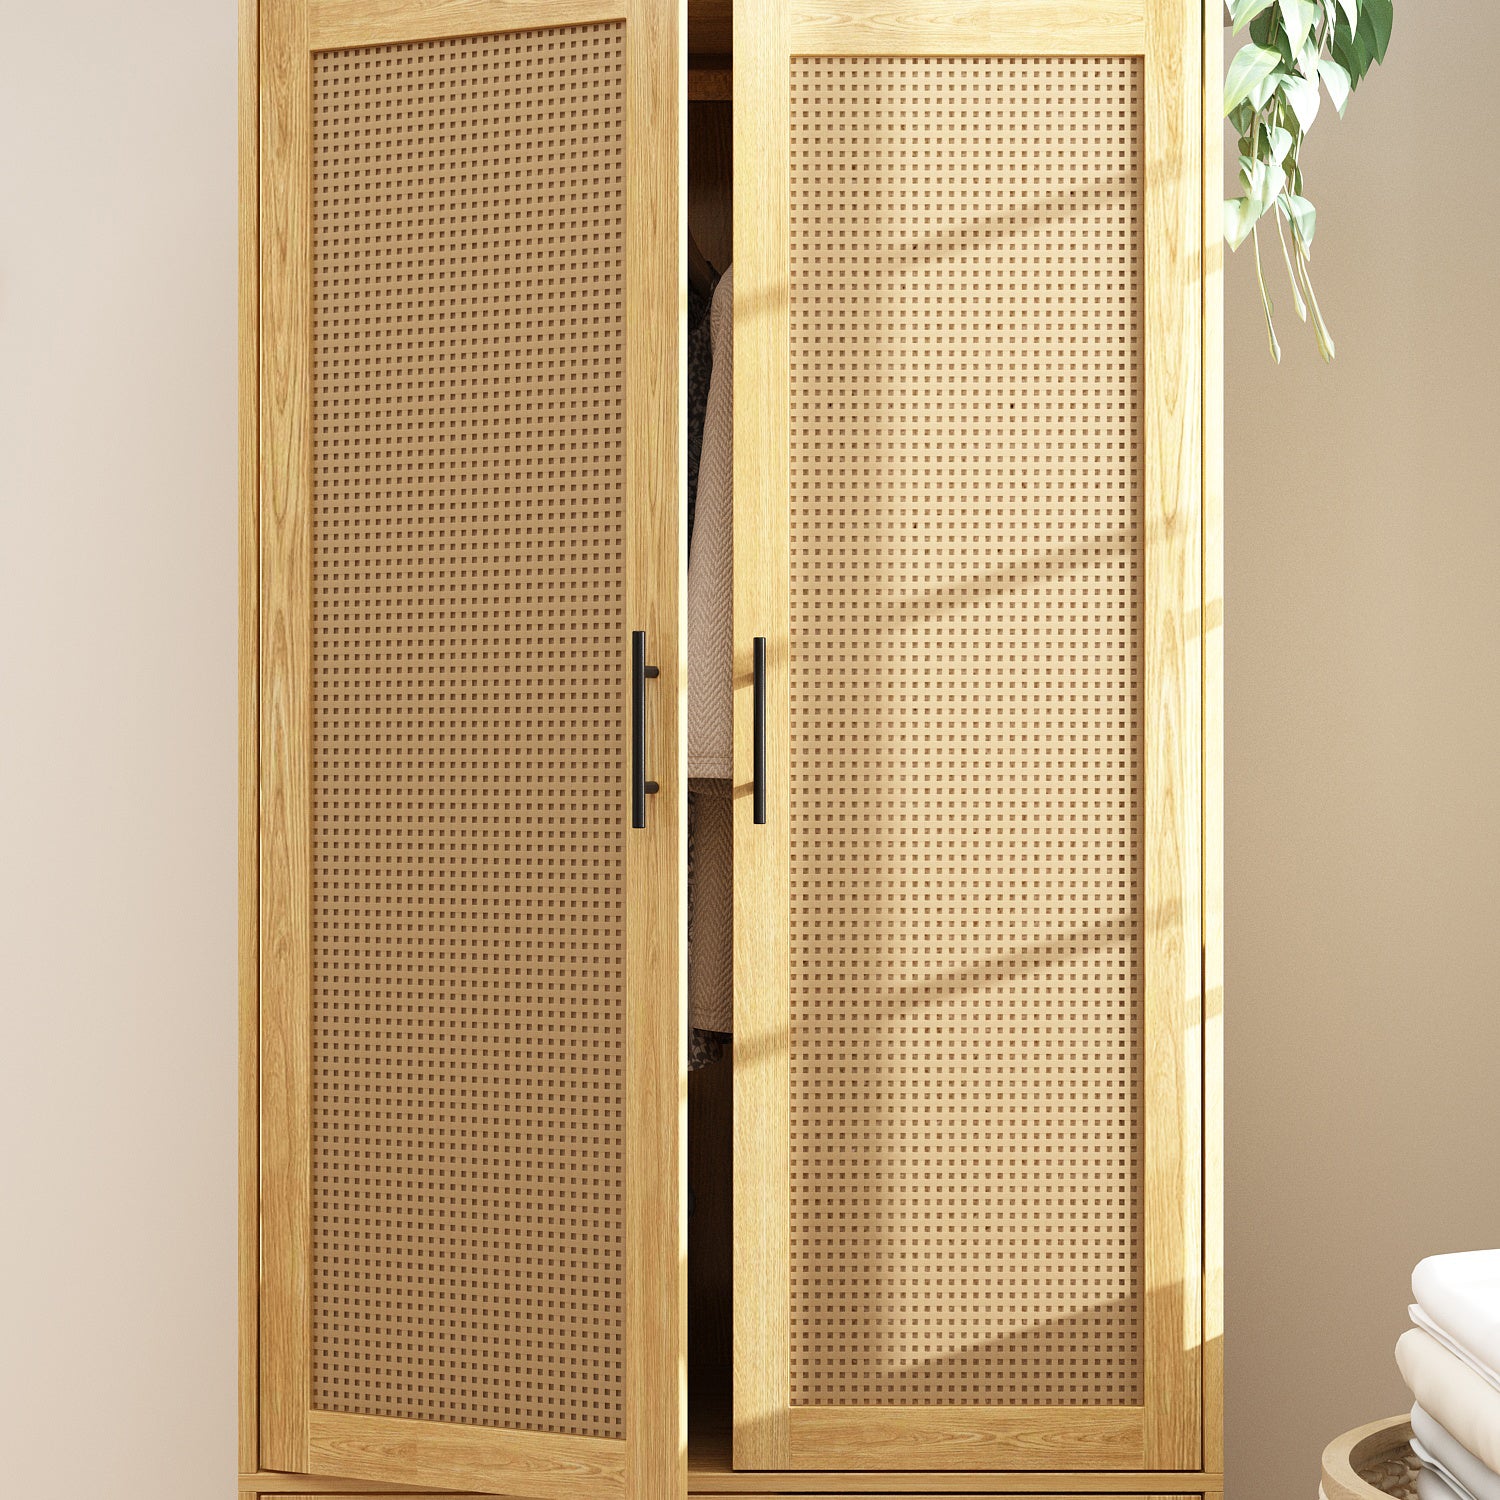 Wooden Wardrobe Armoire with 2 Doors 2 Drawers Bedroom Closet with Hanging Rod Storage Drawers